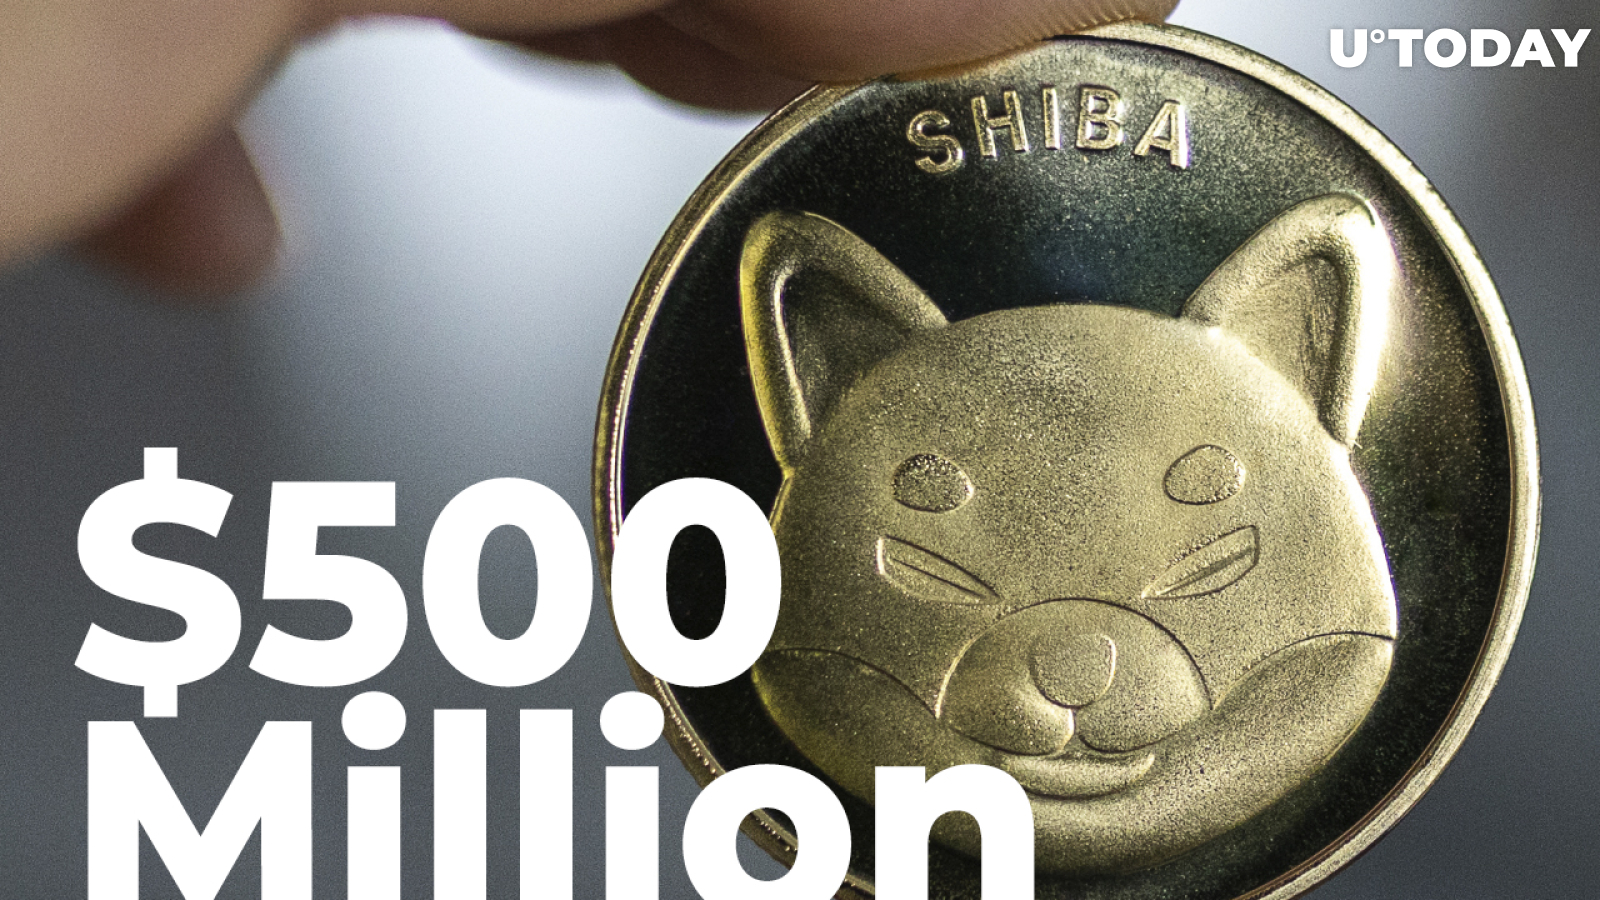 Shiba Inu Whale Transfers Almost $500 Million Worth of Tokens